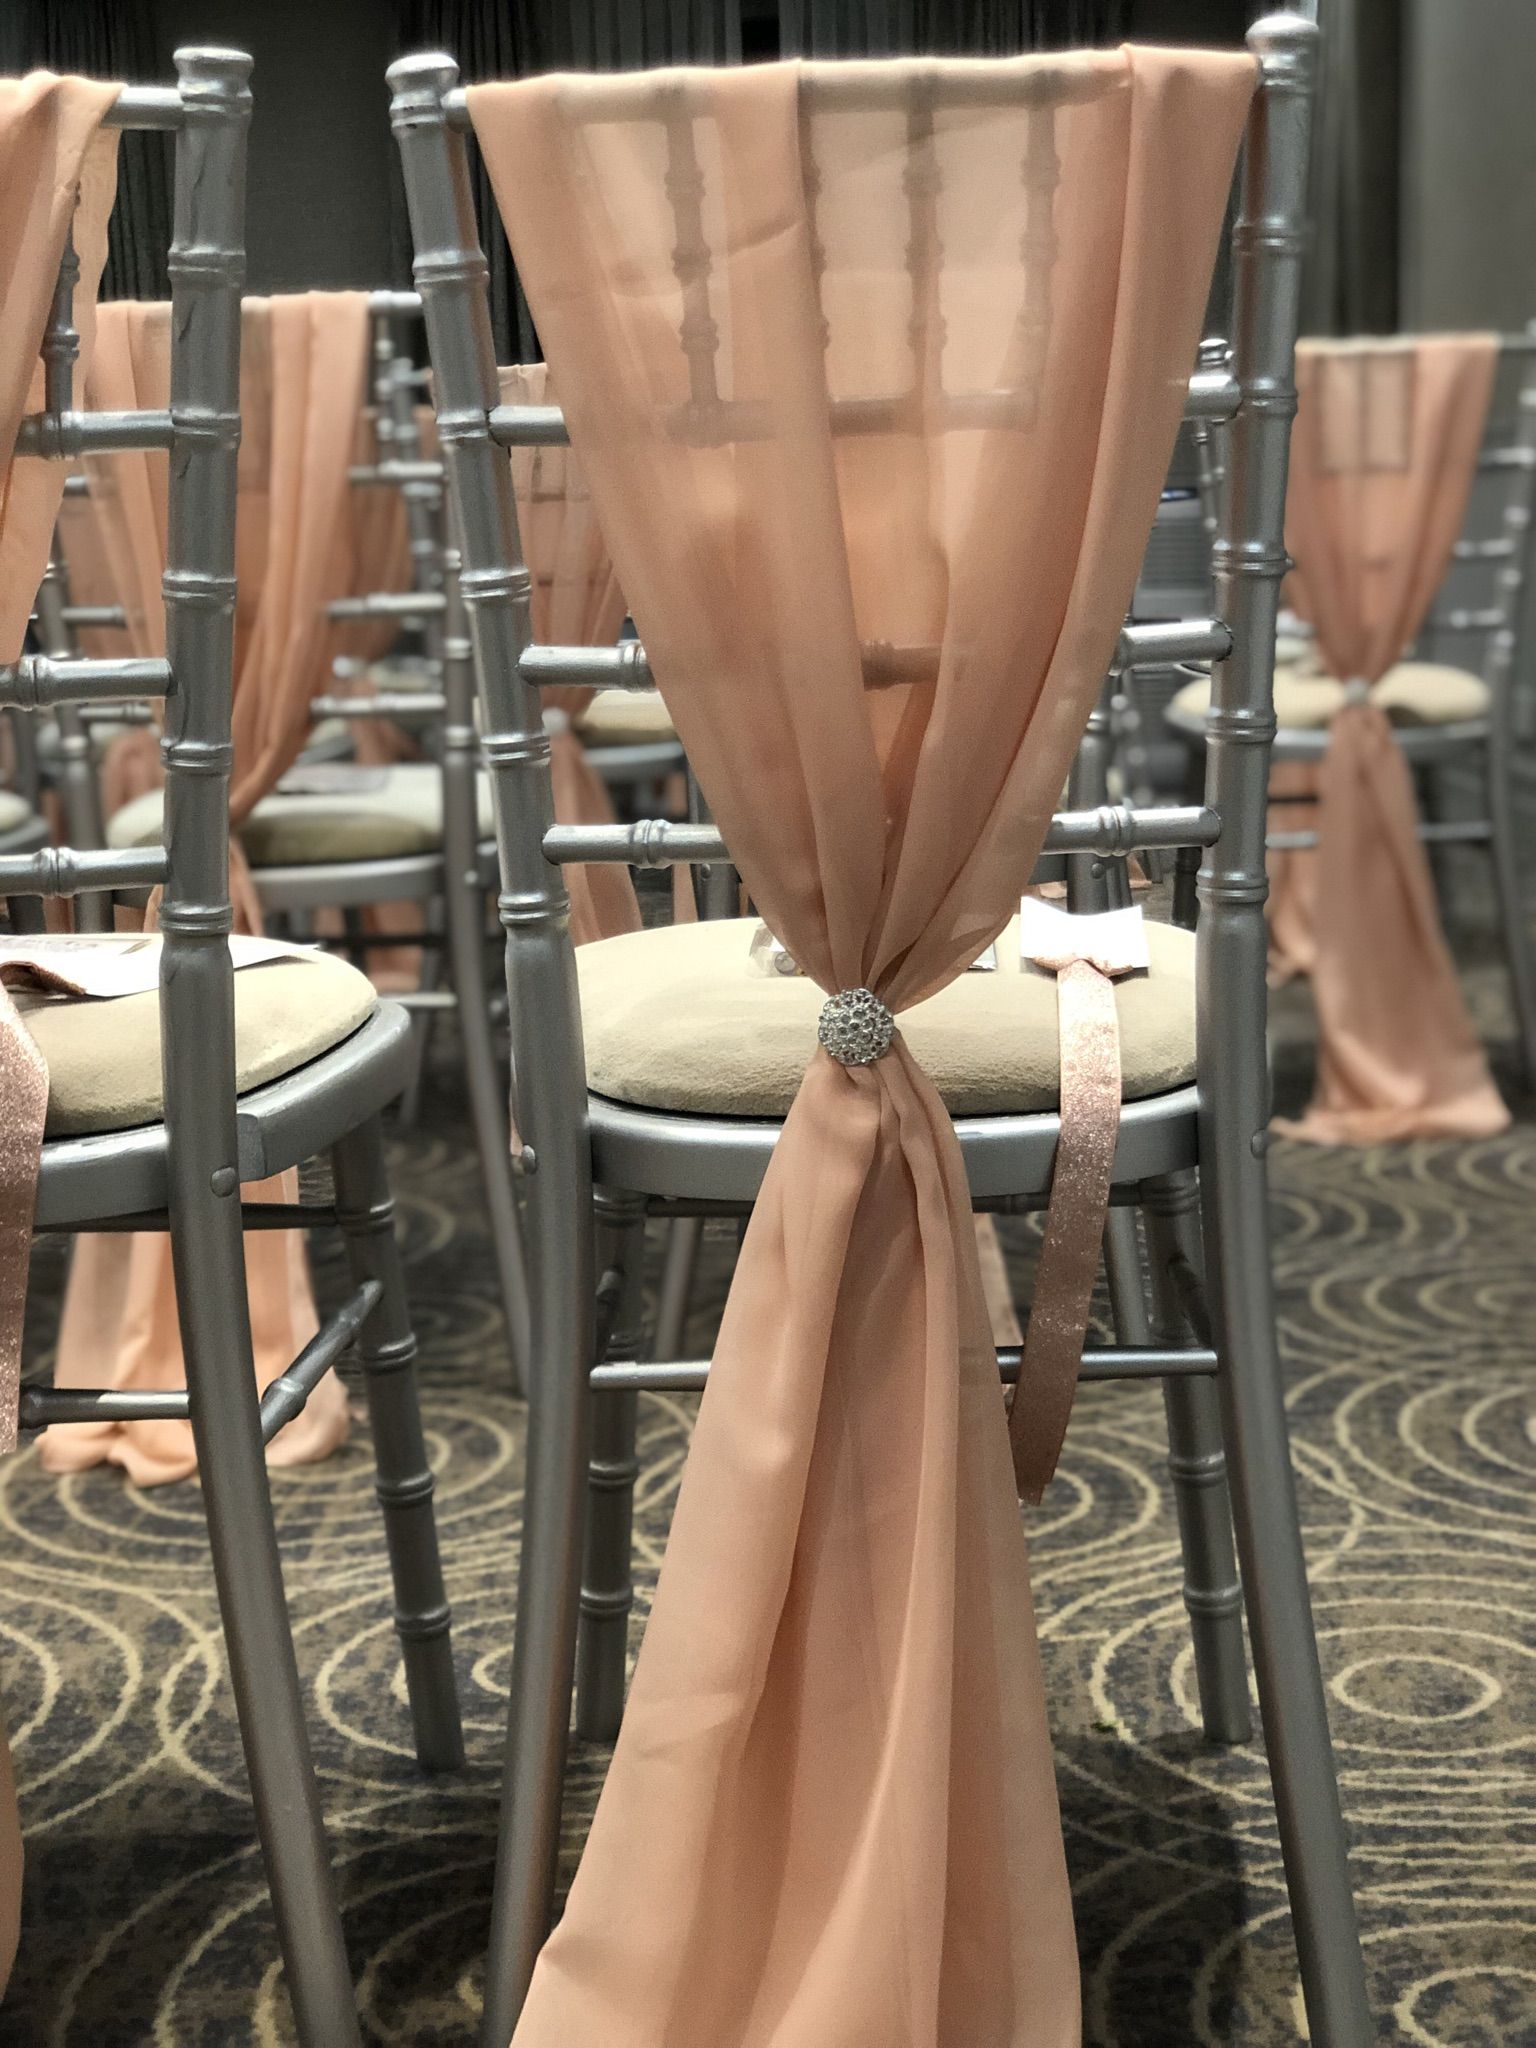 a row of chairs with pink sashes on them.